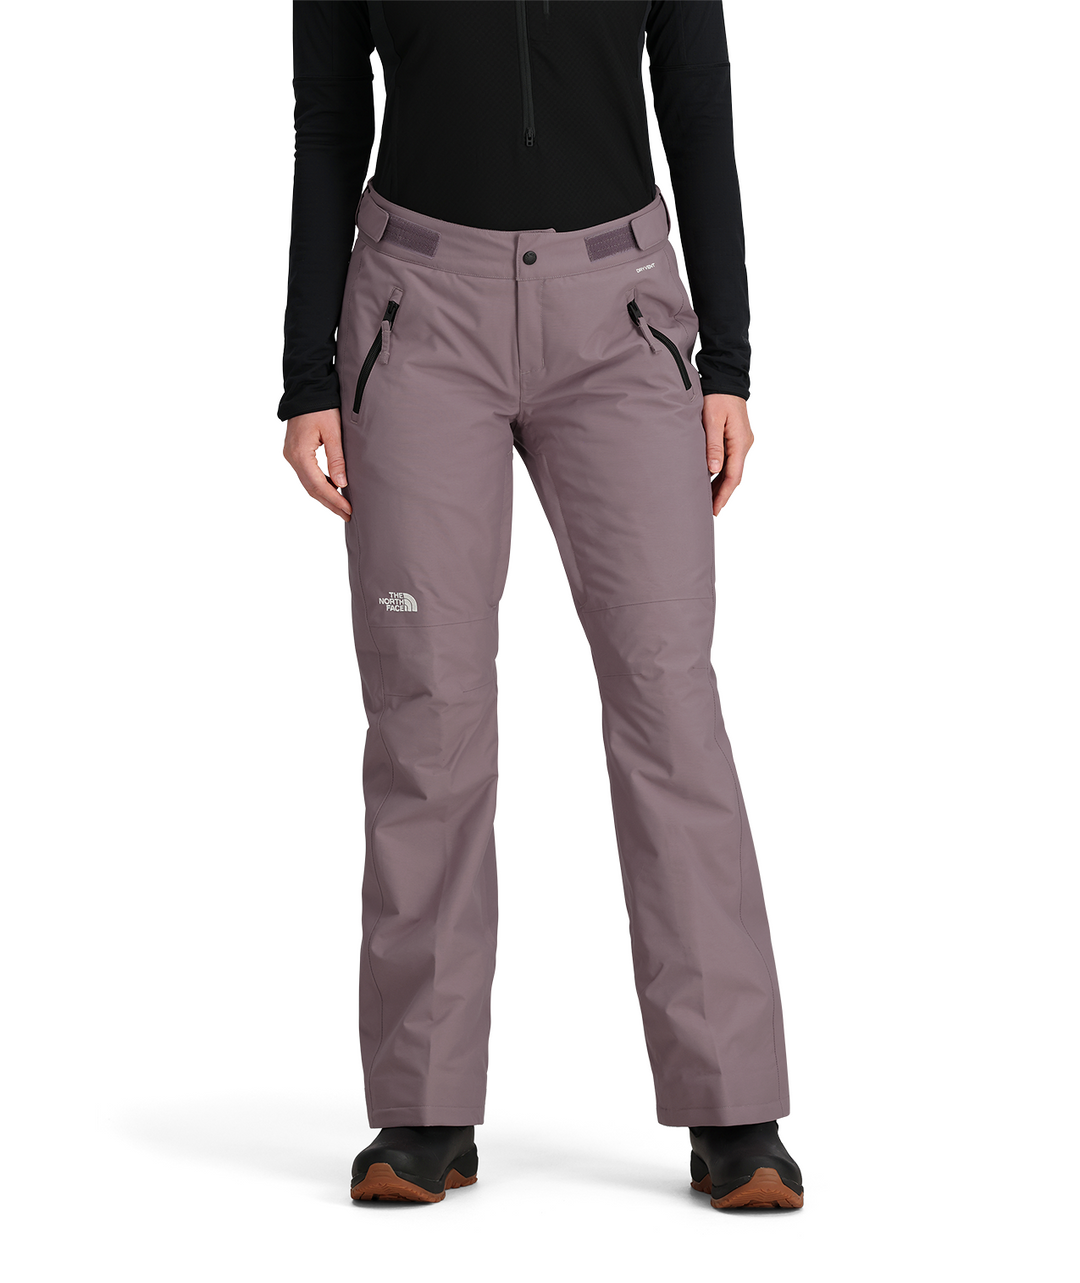 The North Face Aboutaday Pant Women's